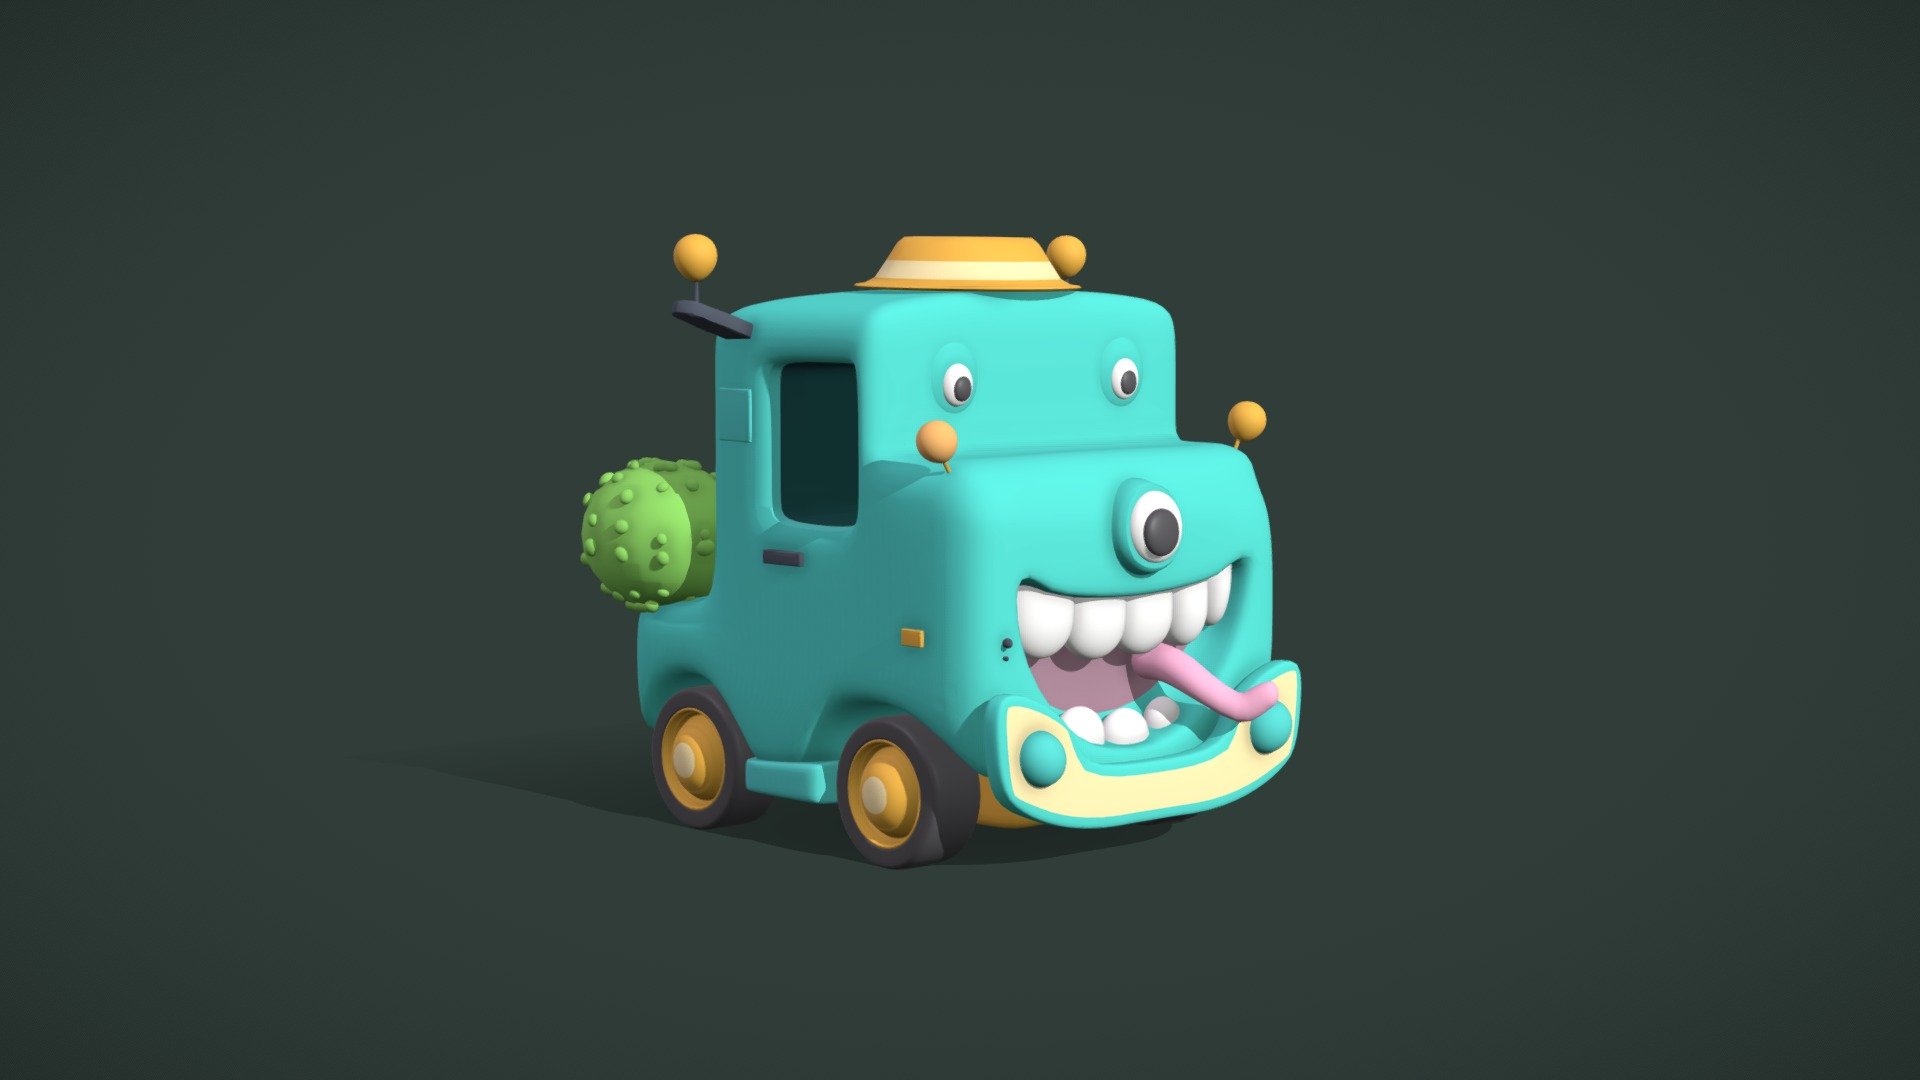 Cartoon vehicle character toy - Cartoon Toy Car Character Illustration - Download Free 3D model by antonmoek 3d model